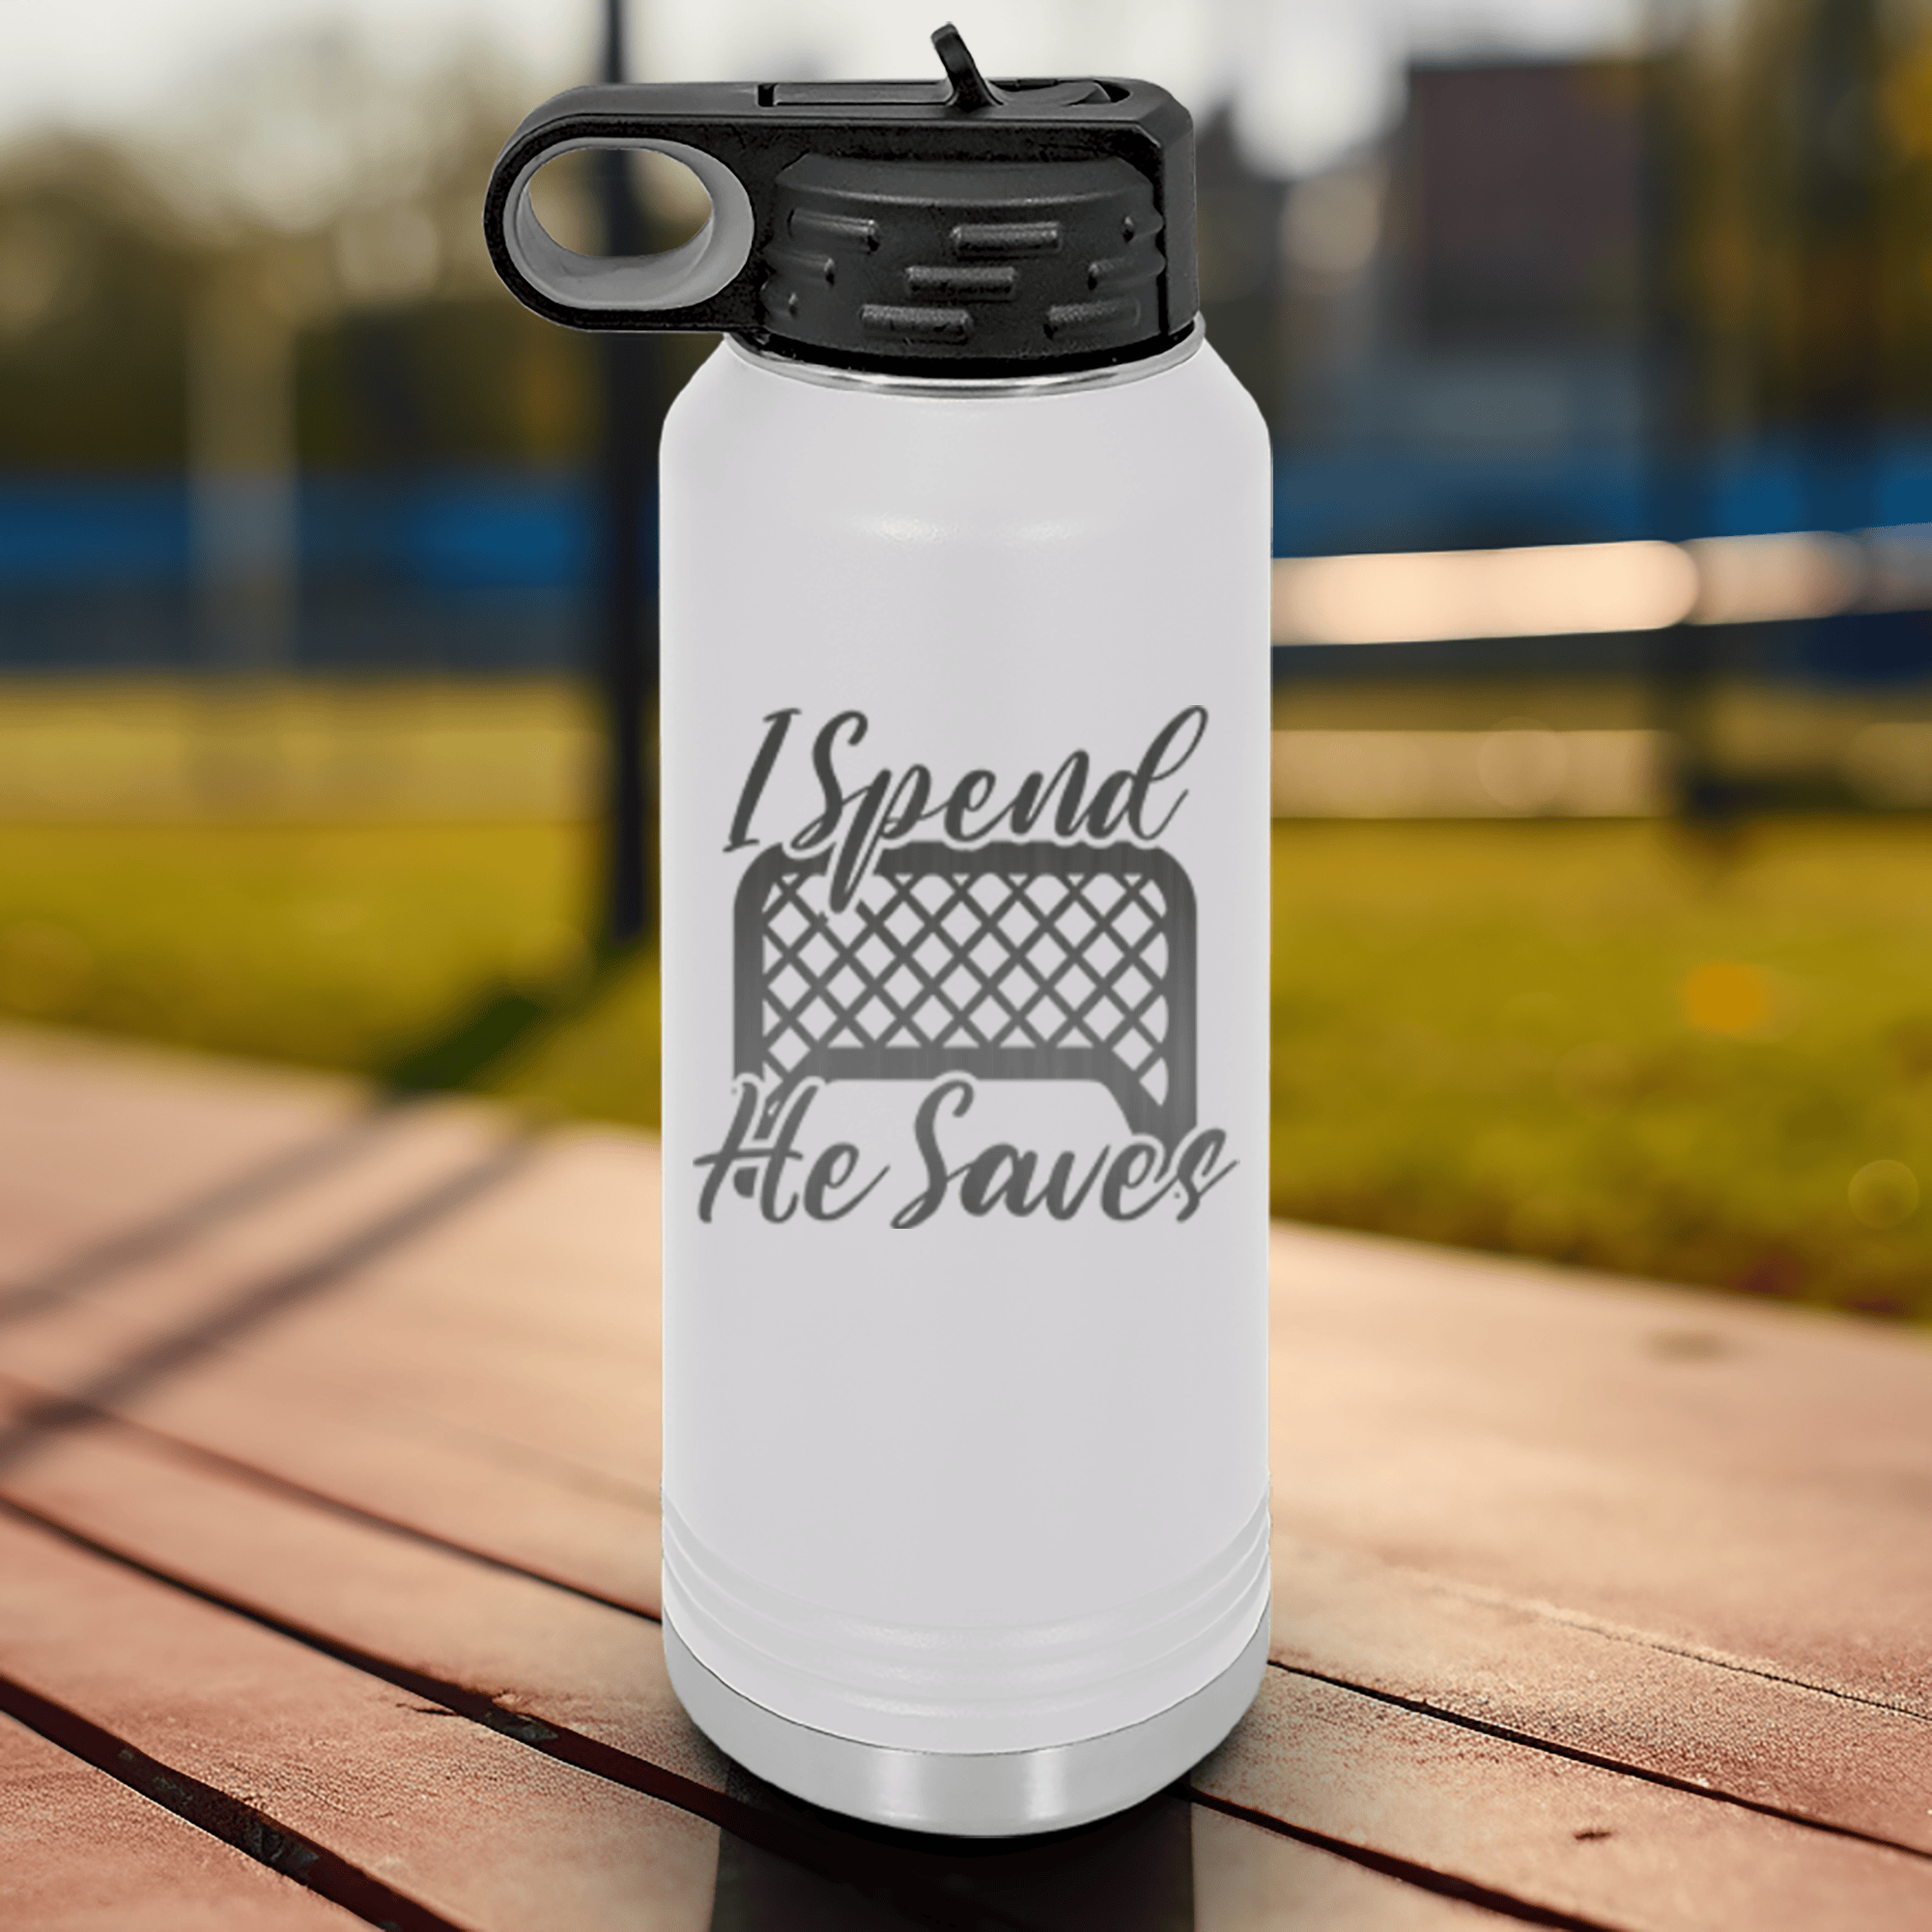 White Hockey Water Bottle With I Shop He Stops Design